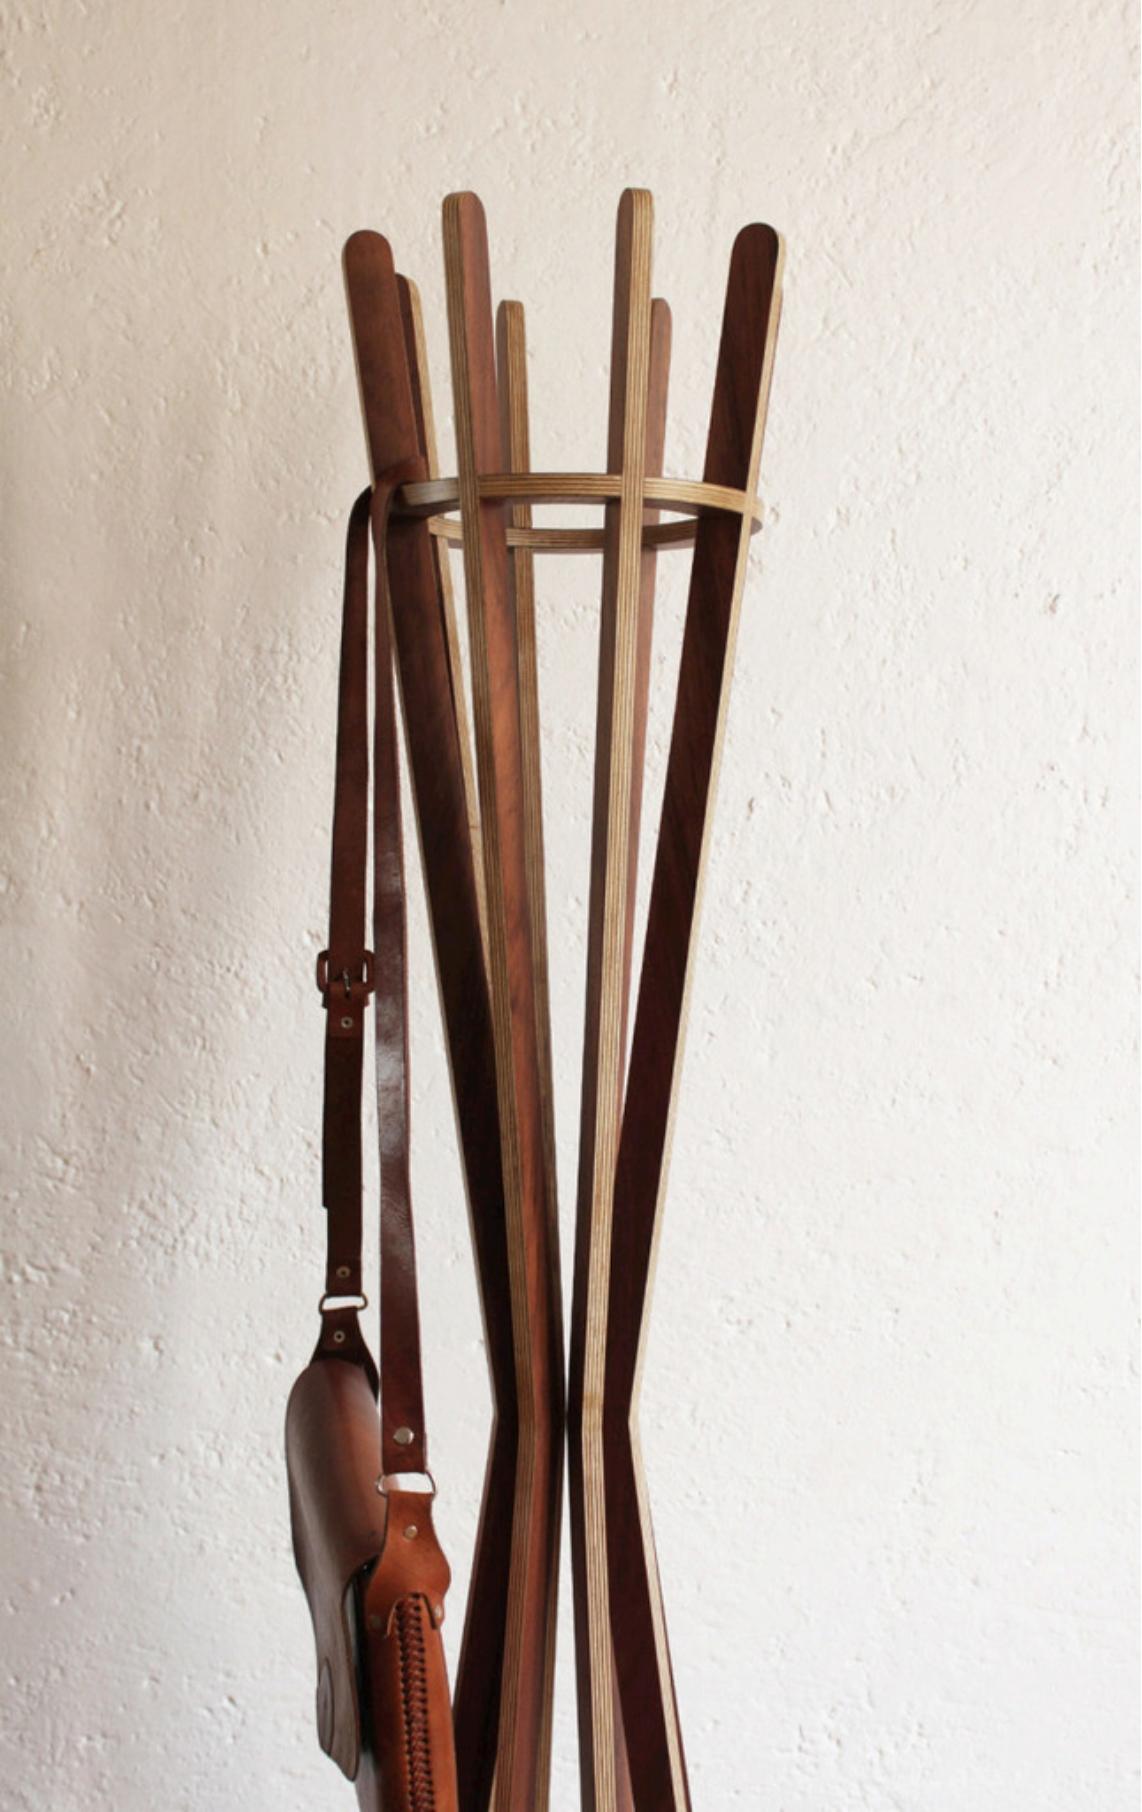 Mexican Core Coat Rack by Maria Beckmann, Represented by Tuleste Factory